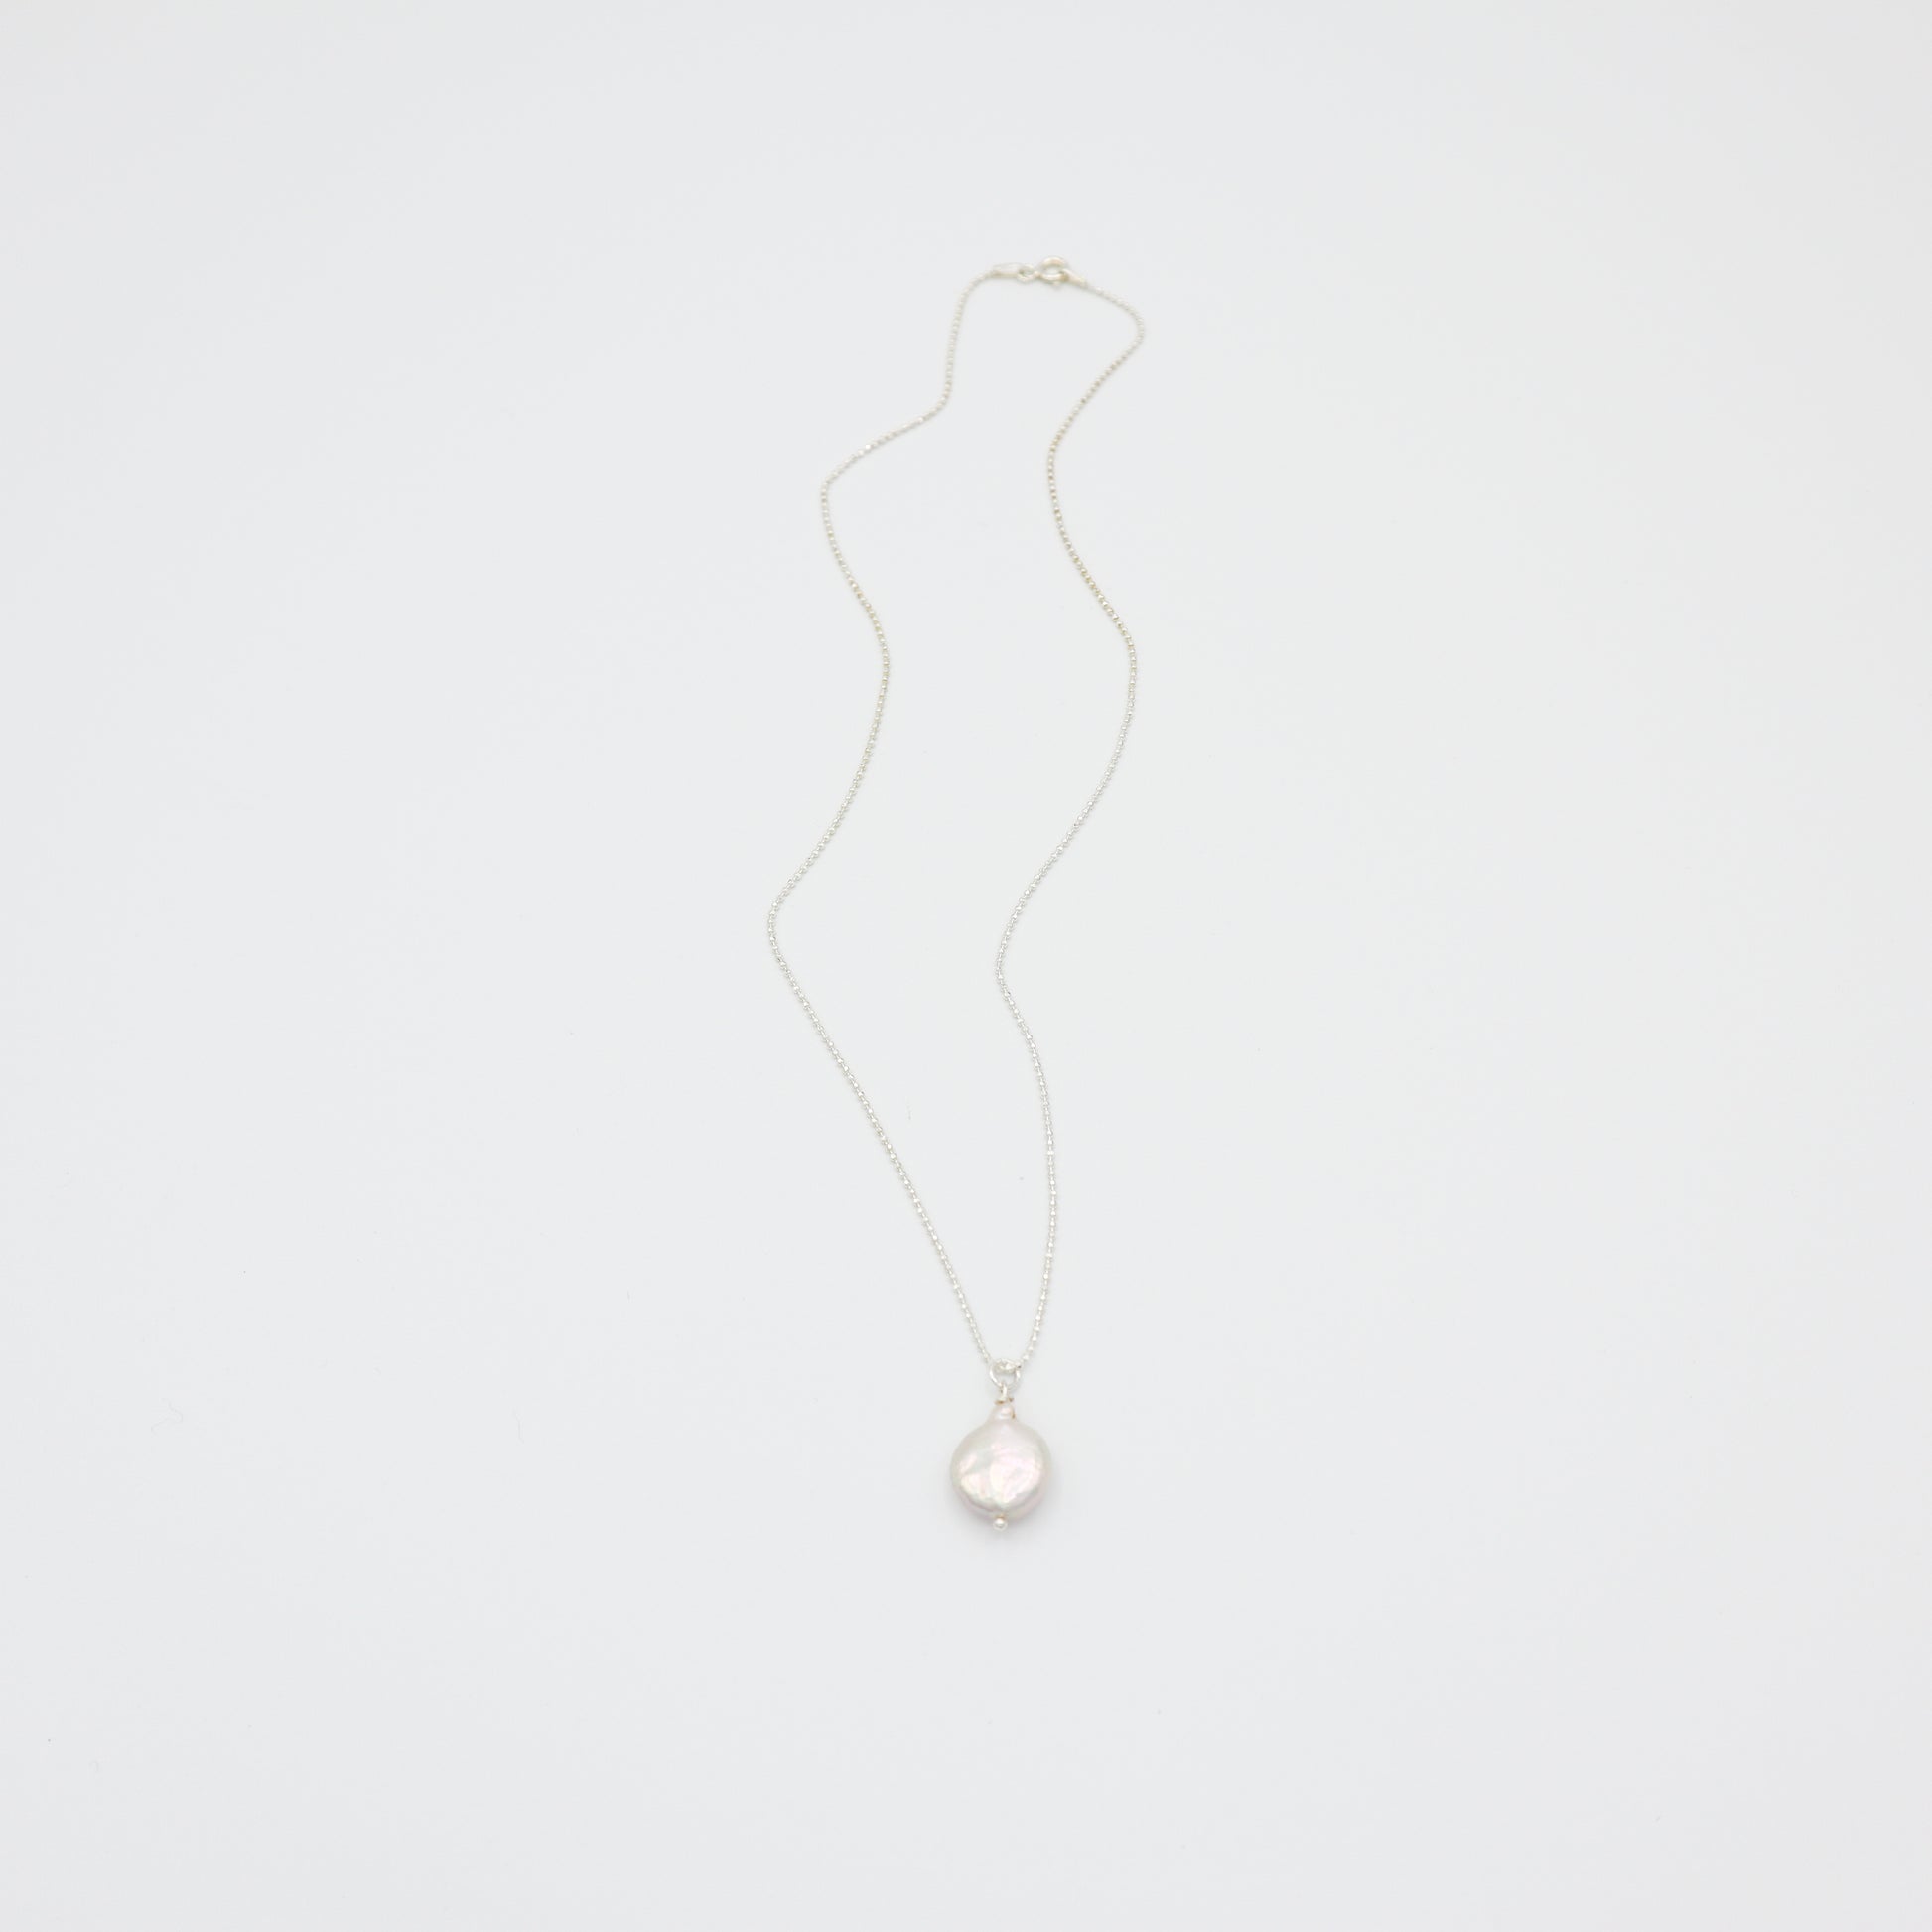 Roop Jewelry Sweet Pearl Necklace in Sterling Silver. Simple coin pearl necklace. Handmade pearl jewelry from Oakland, Ca.